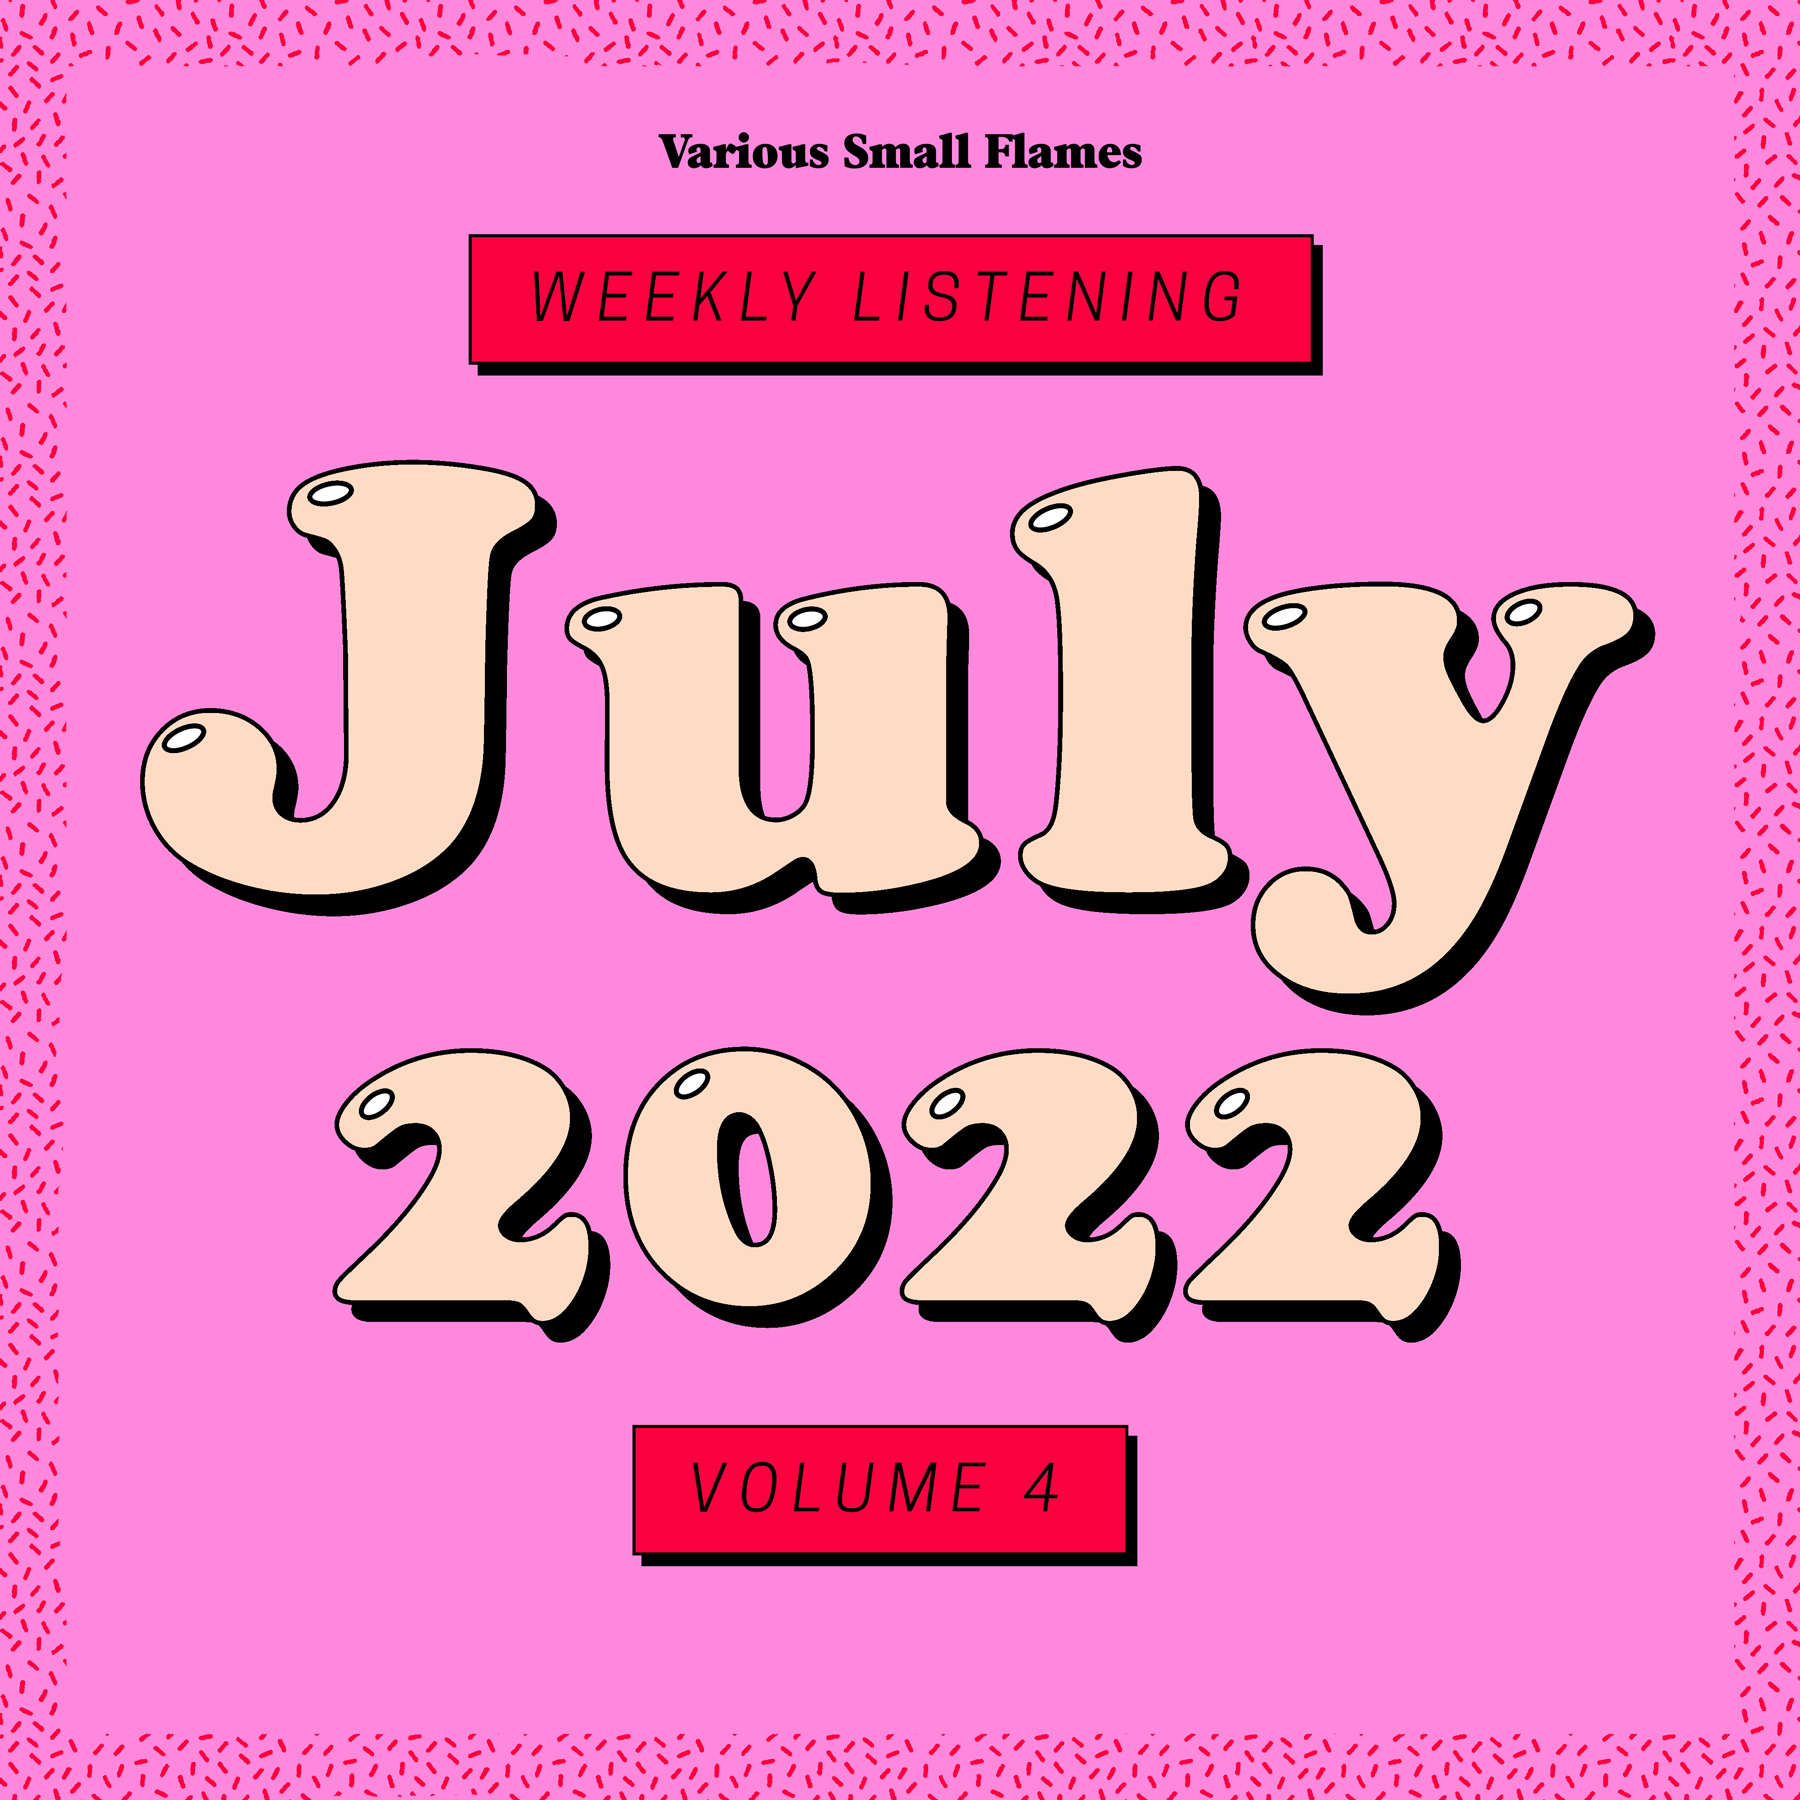 weekly listening july 2022 volume 4 various small flames